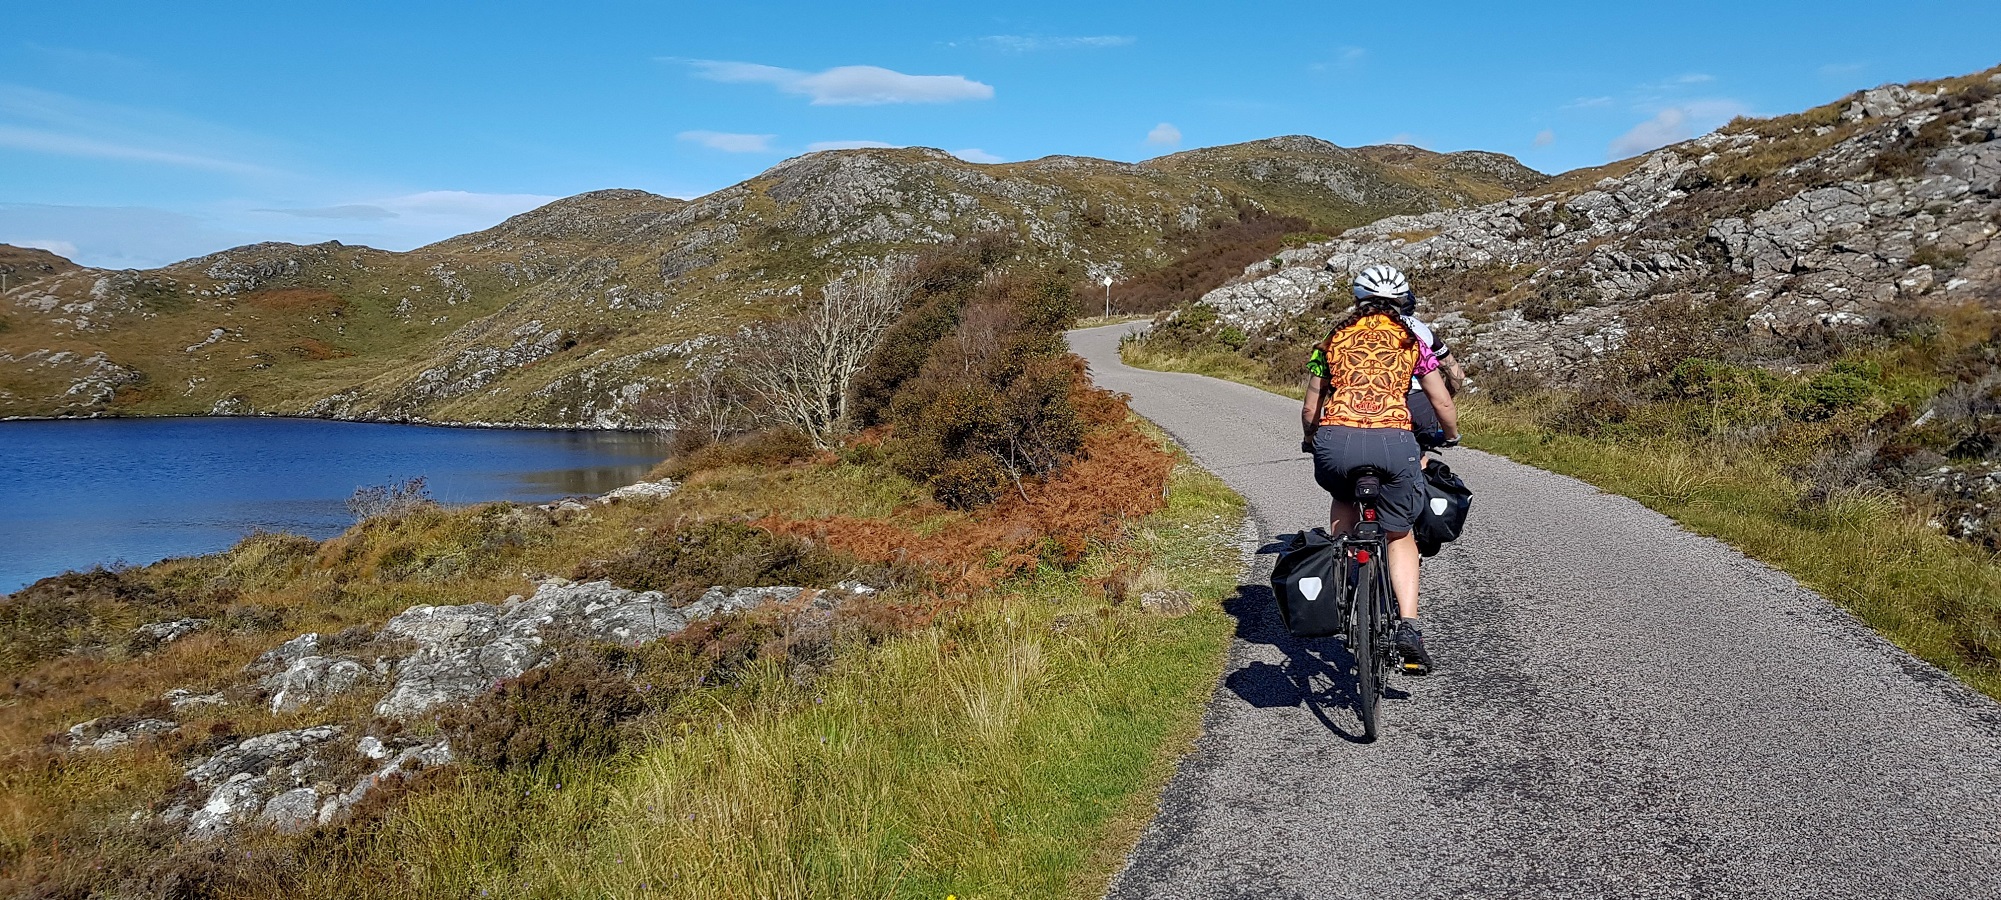 Photos from our Far North - Self Guided Cycling Holiday